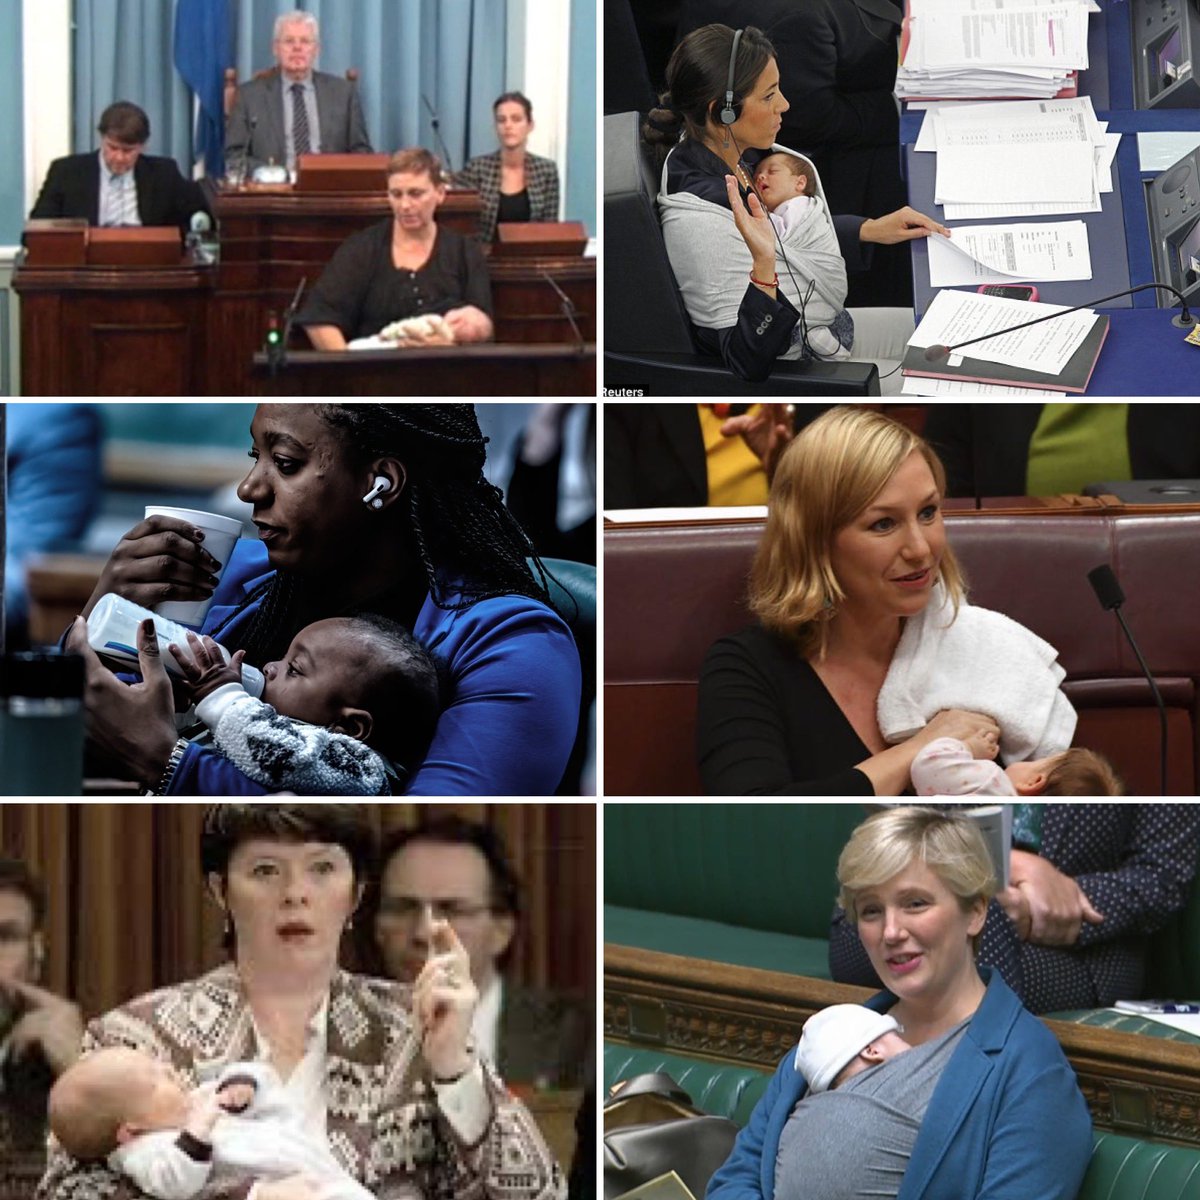 Happy Mother’s Day, especially to all the parliamentary moms :)